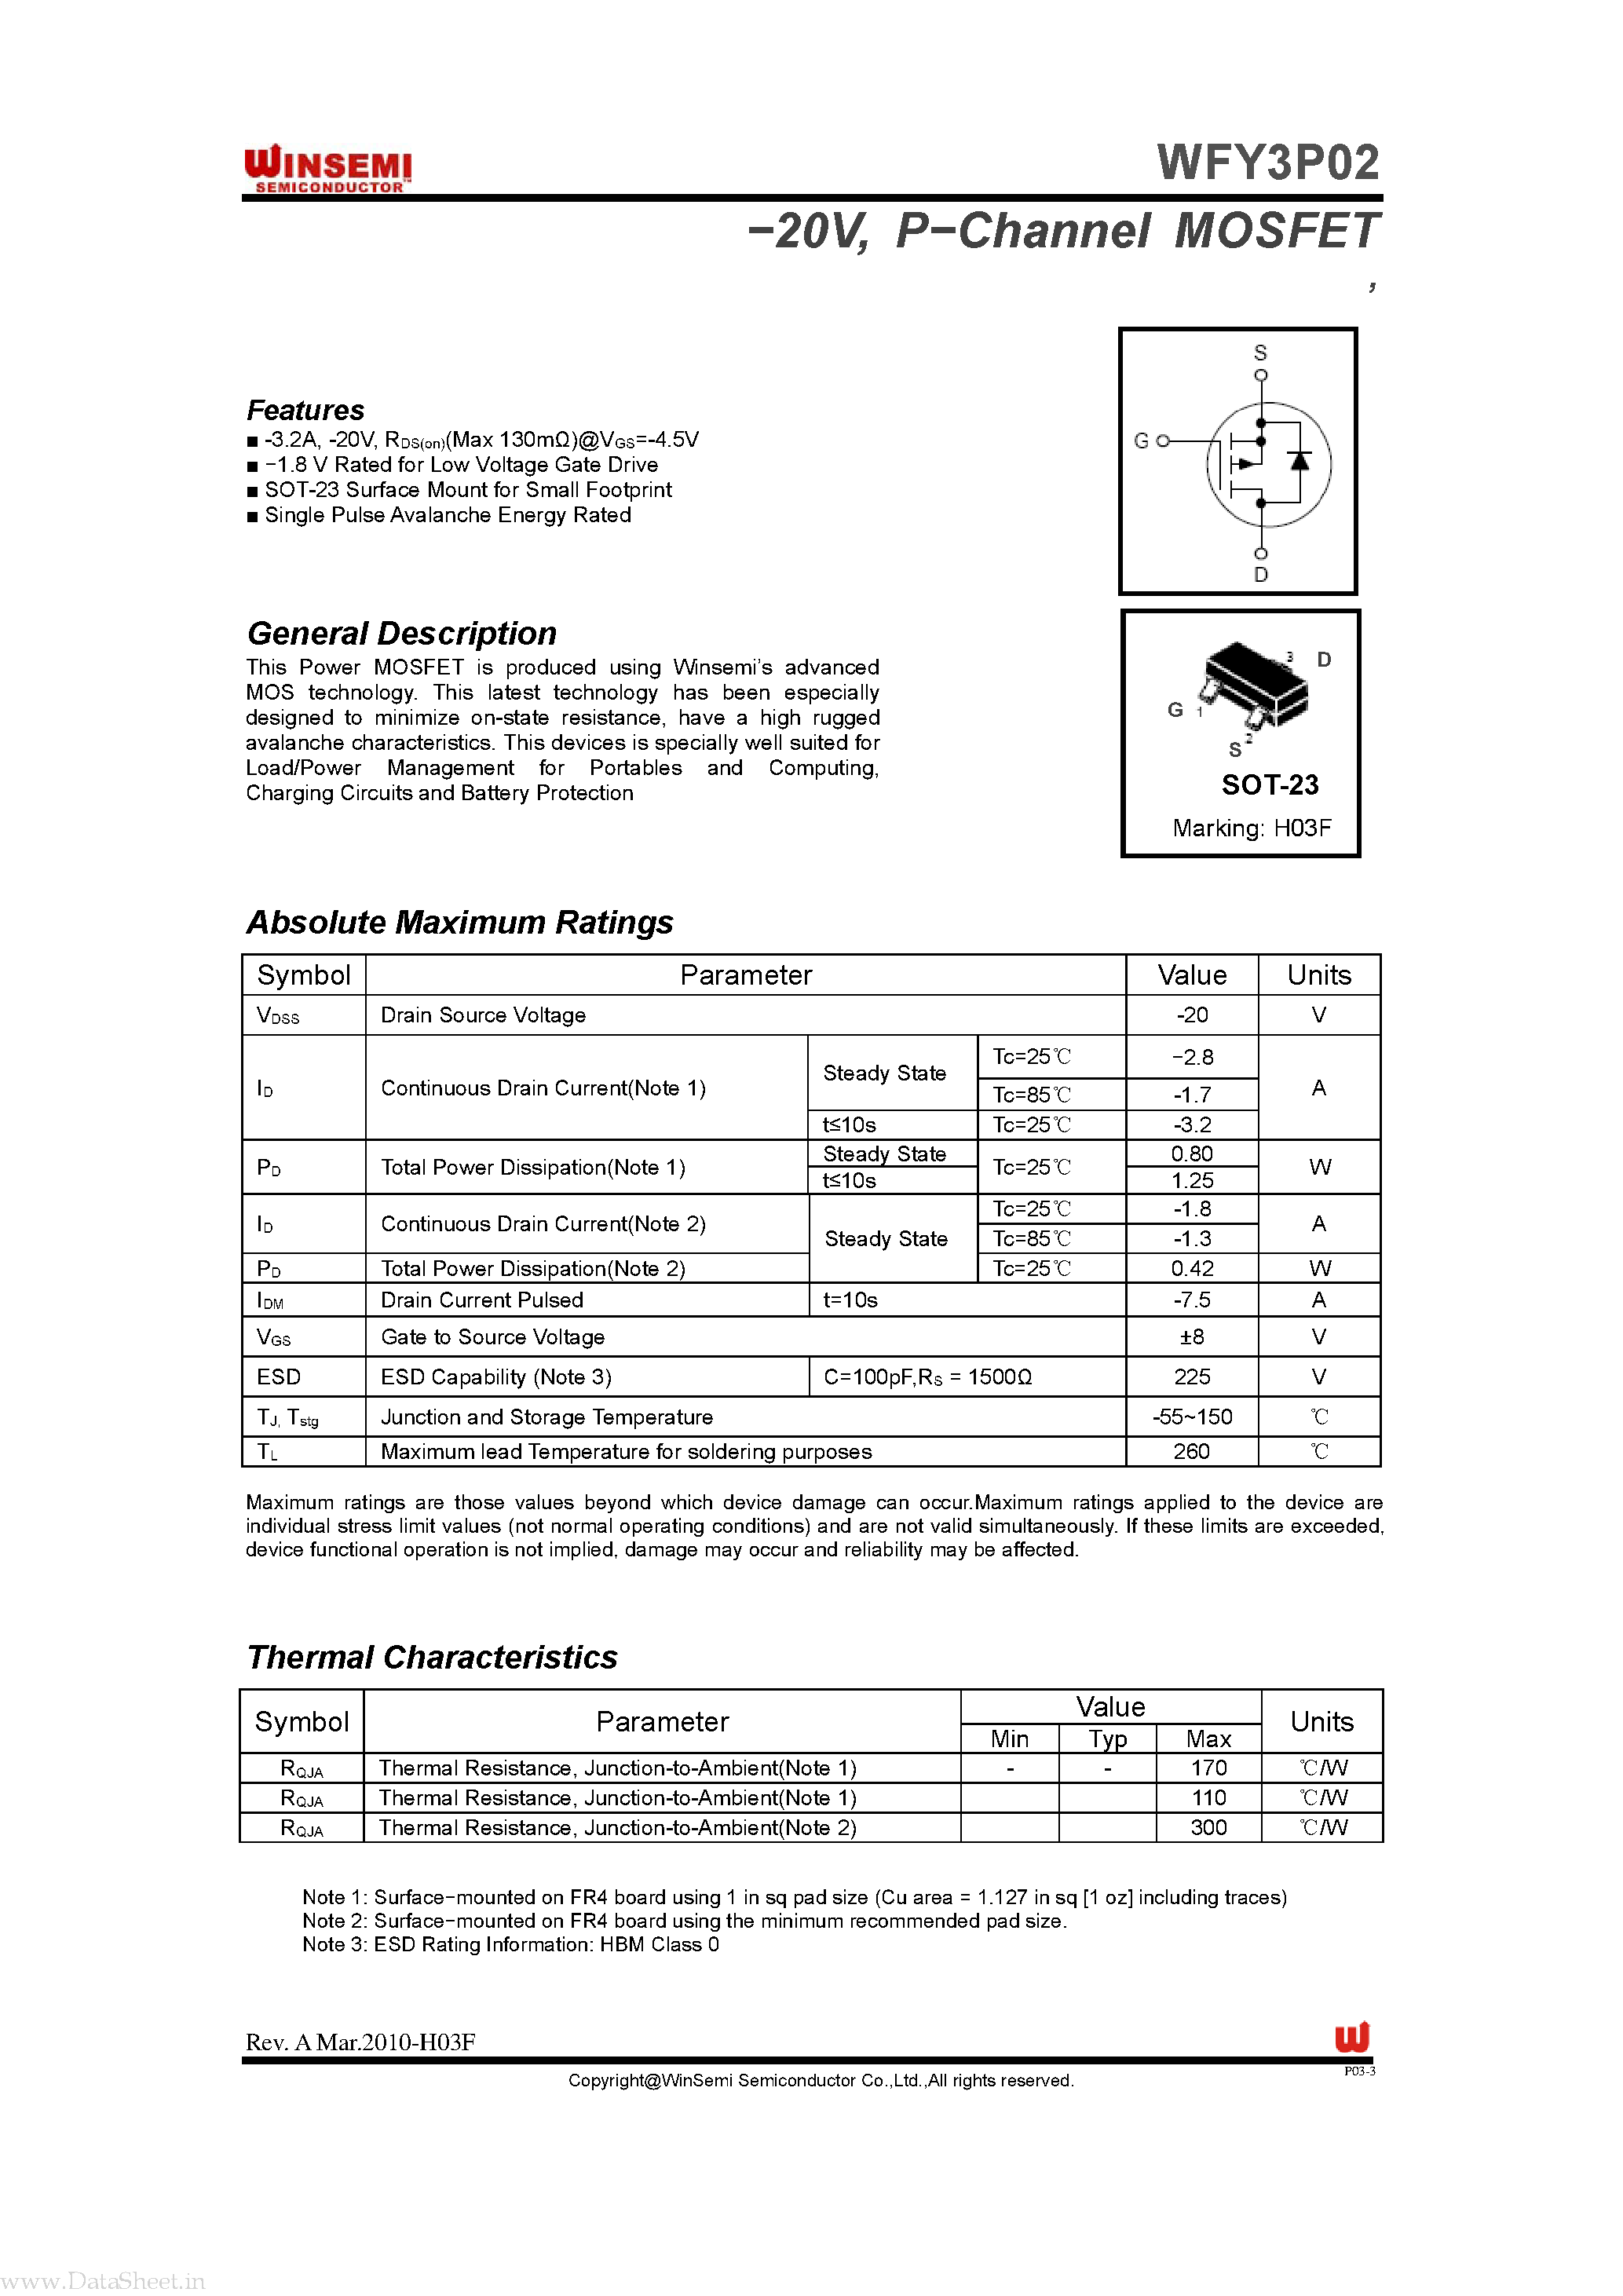 Datasheet WFY3P02 - 20V P-Channel MOSFET page 1